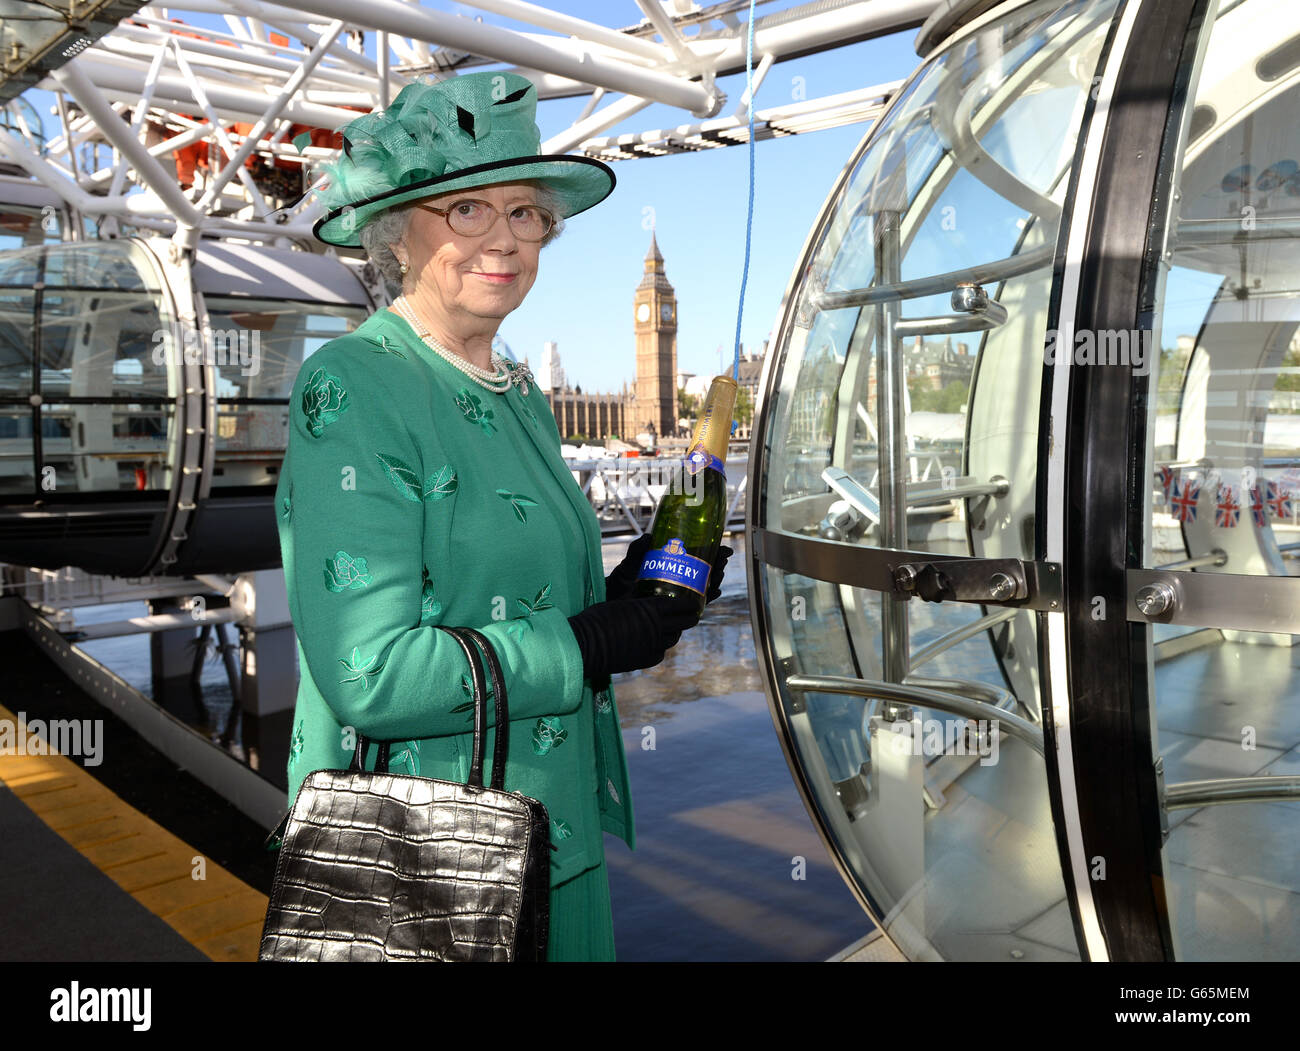 s Coronation and unveiled a plaque by a look-a-like of Queen Elizabeth II. Stock Photo